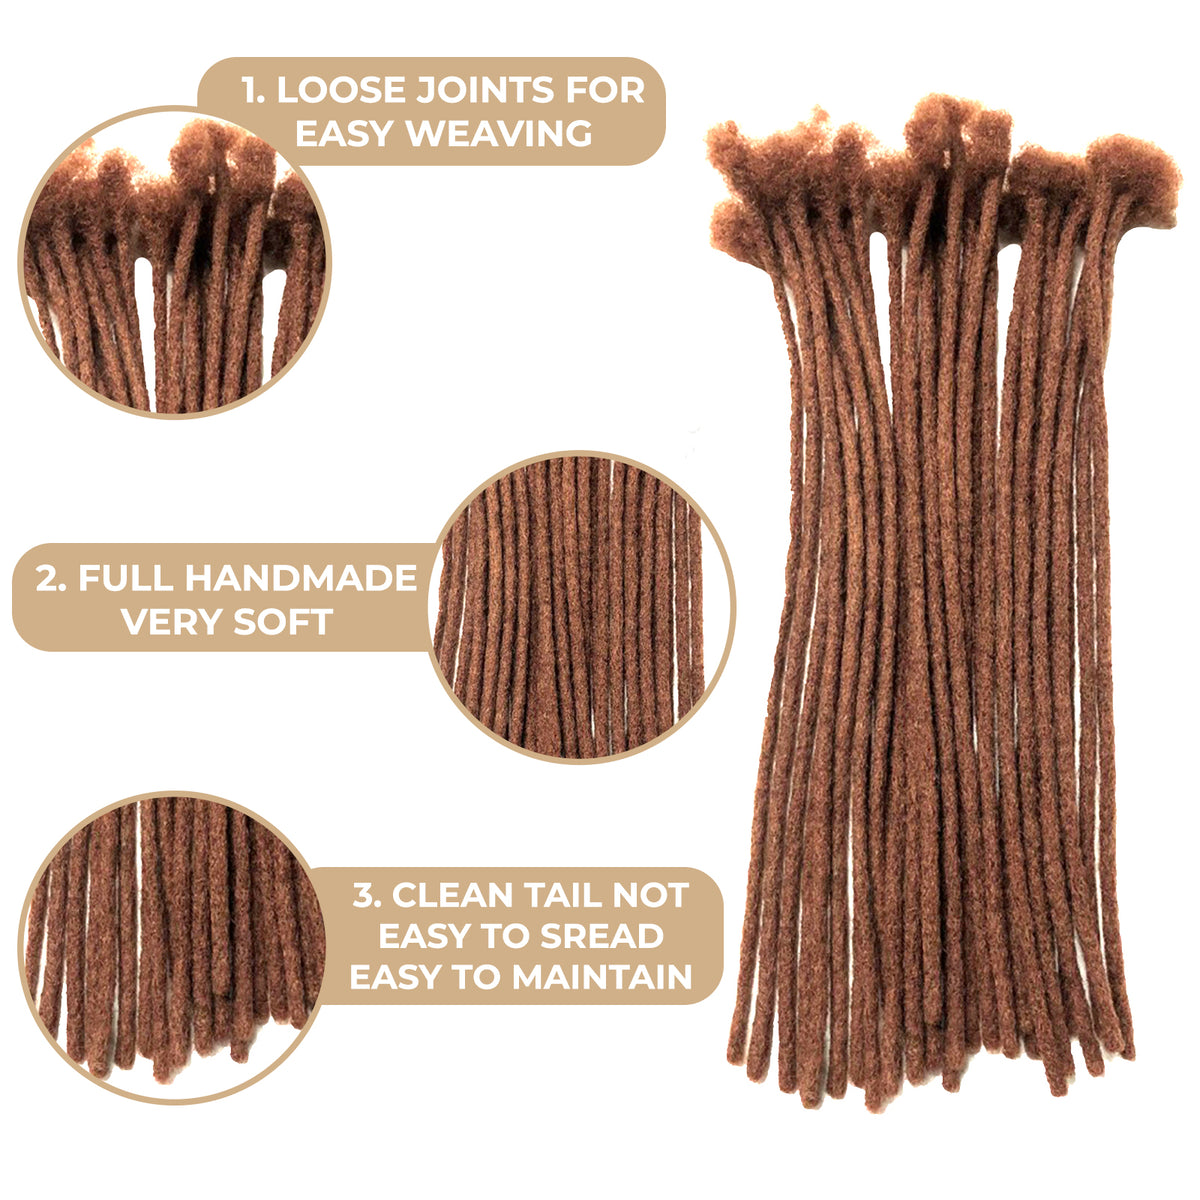 100% Human Hair Dreadlock Extensions 16Inch 10 Strands Handmade Natural Loc Extensions Human Hair Bundle Dreads Extensions For Woman & Men Can Be Dyed/Bleached (Brown/33, 16inch length 0.6 cm Width)